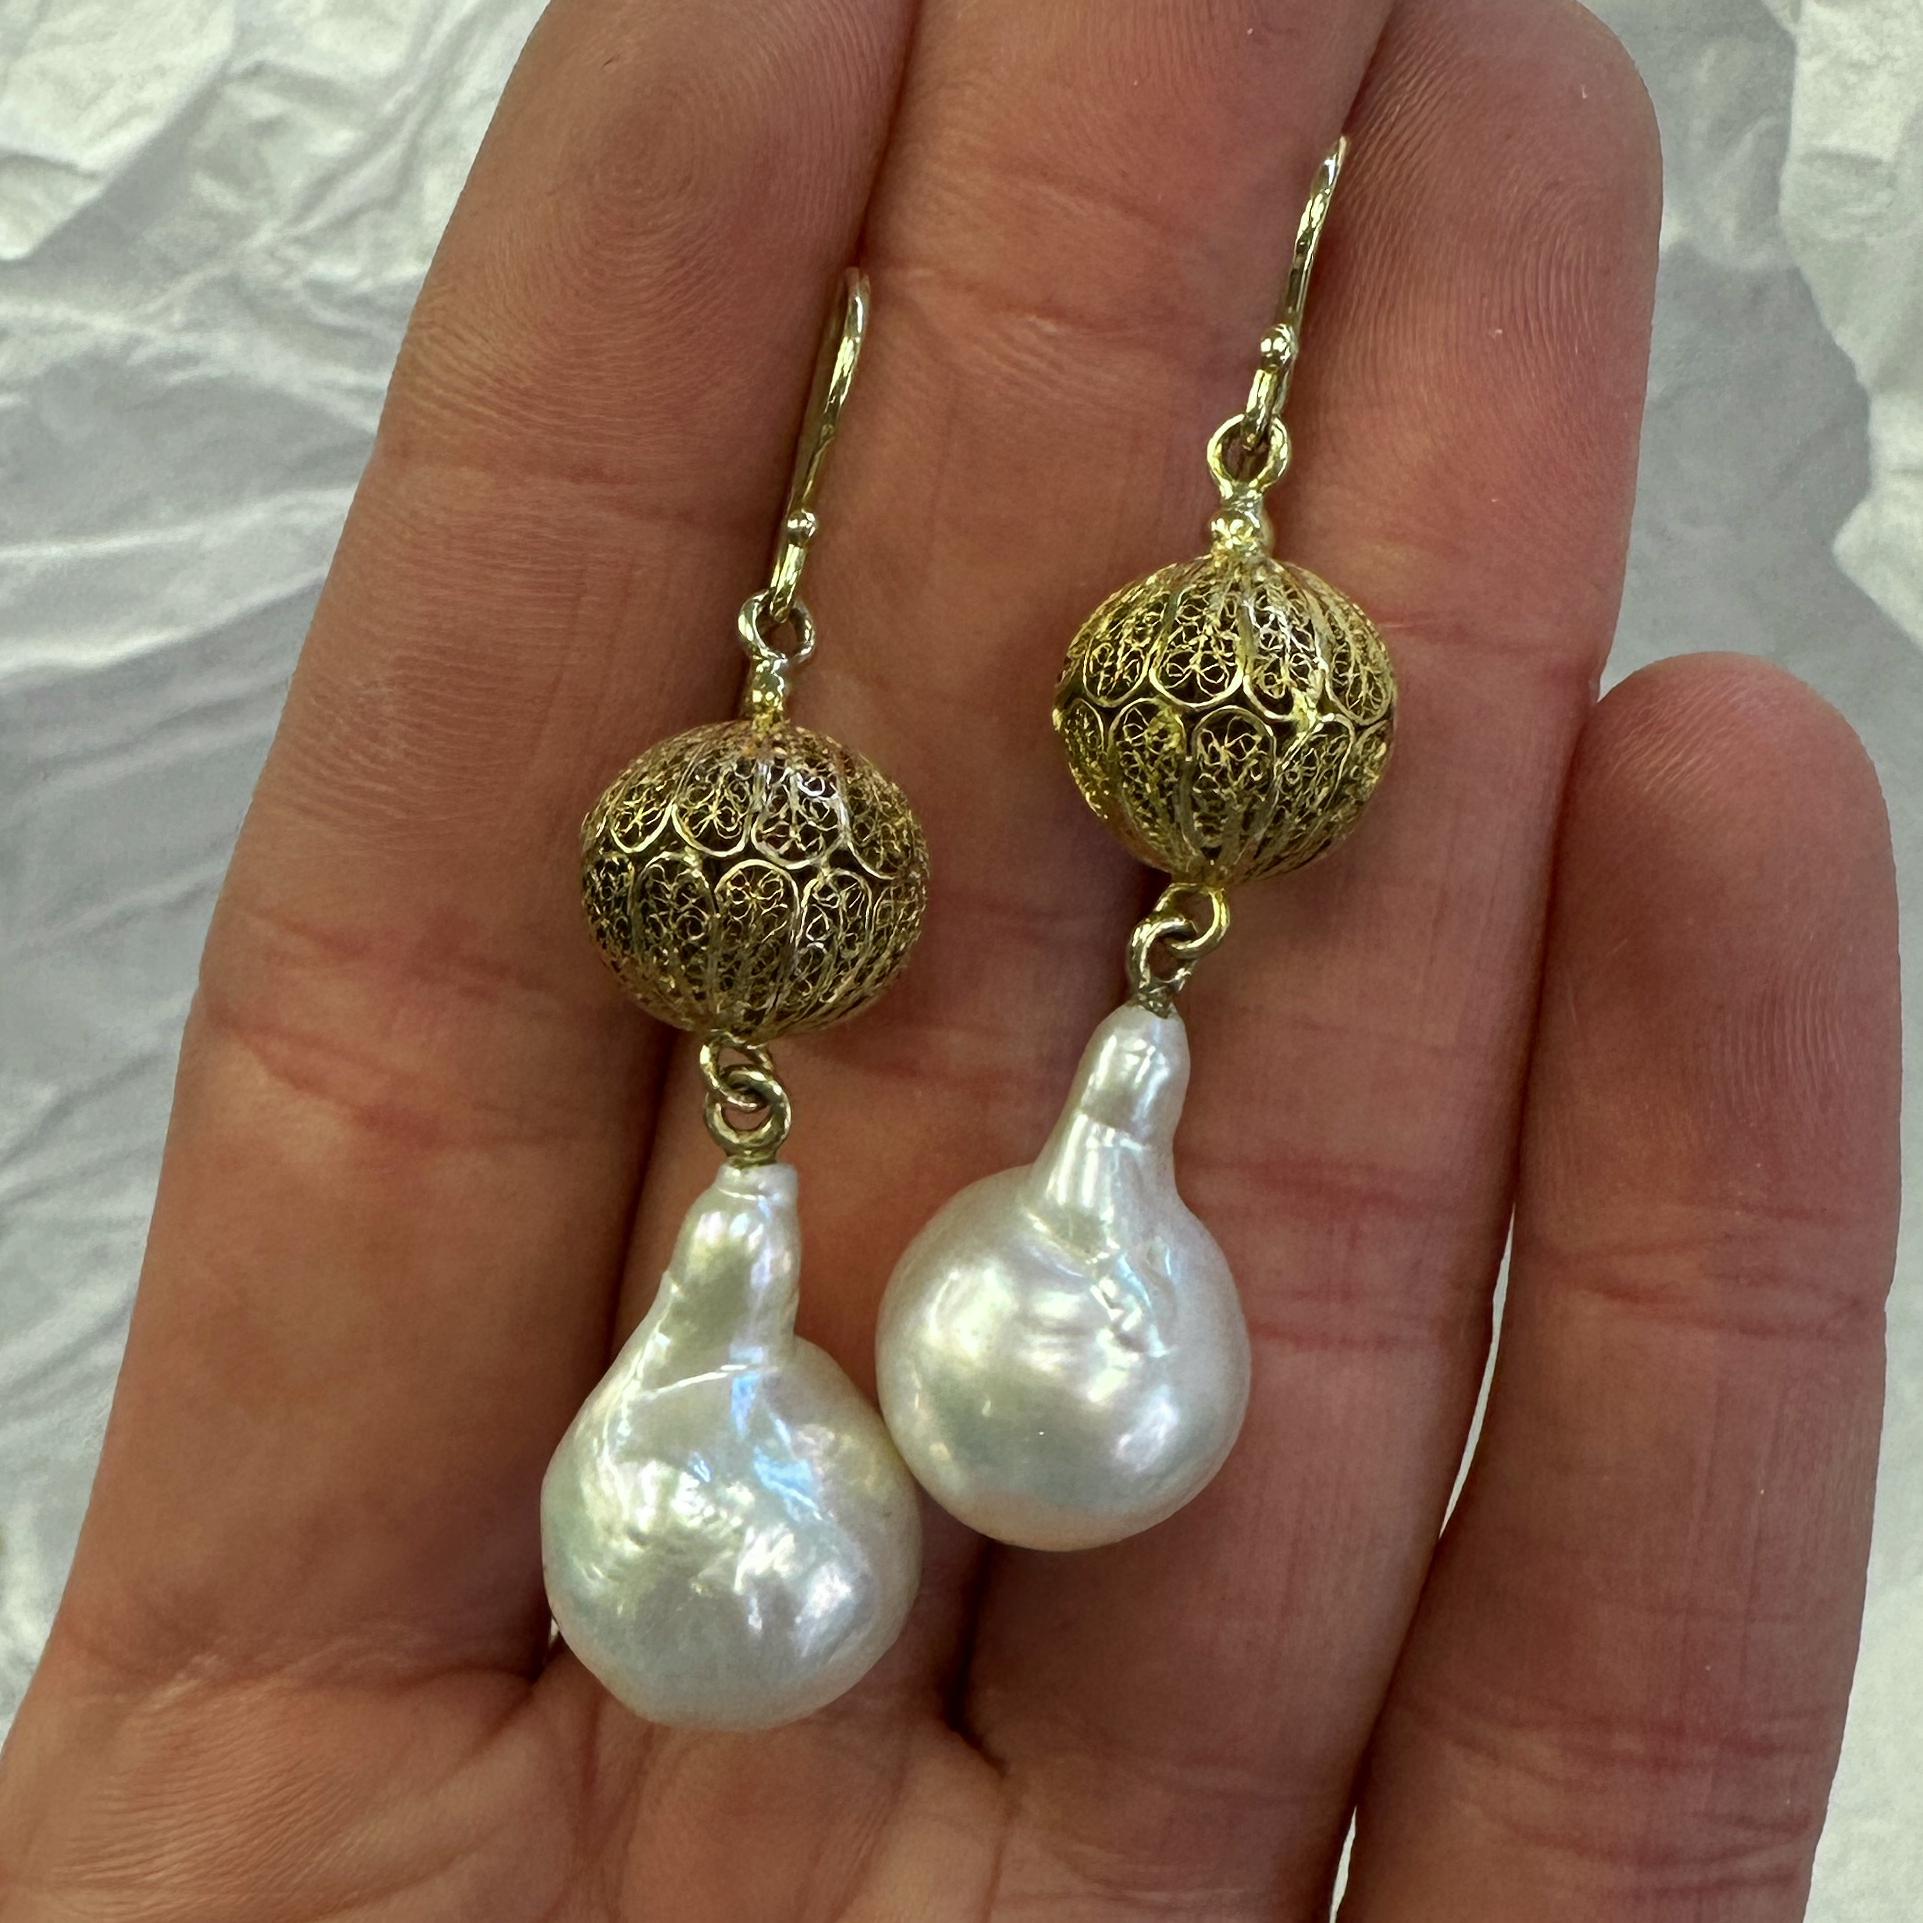 Dangle Wire Hook Earrings with Baroque Freshwater Pearls and 22K Gold Beads For Sale 4